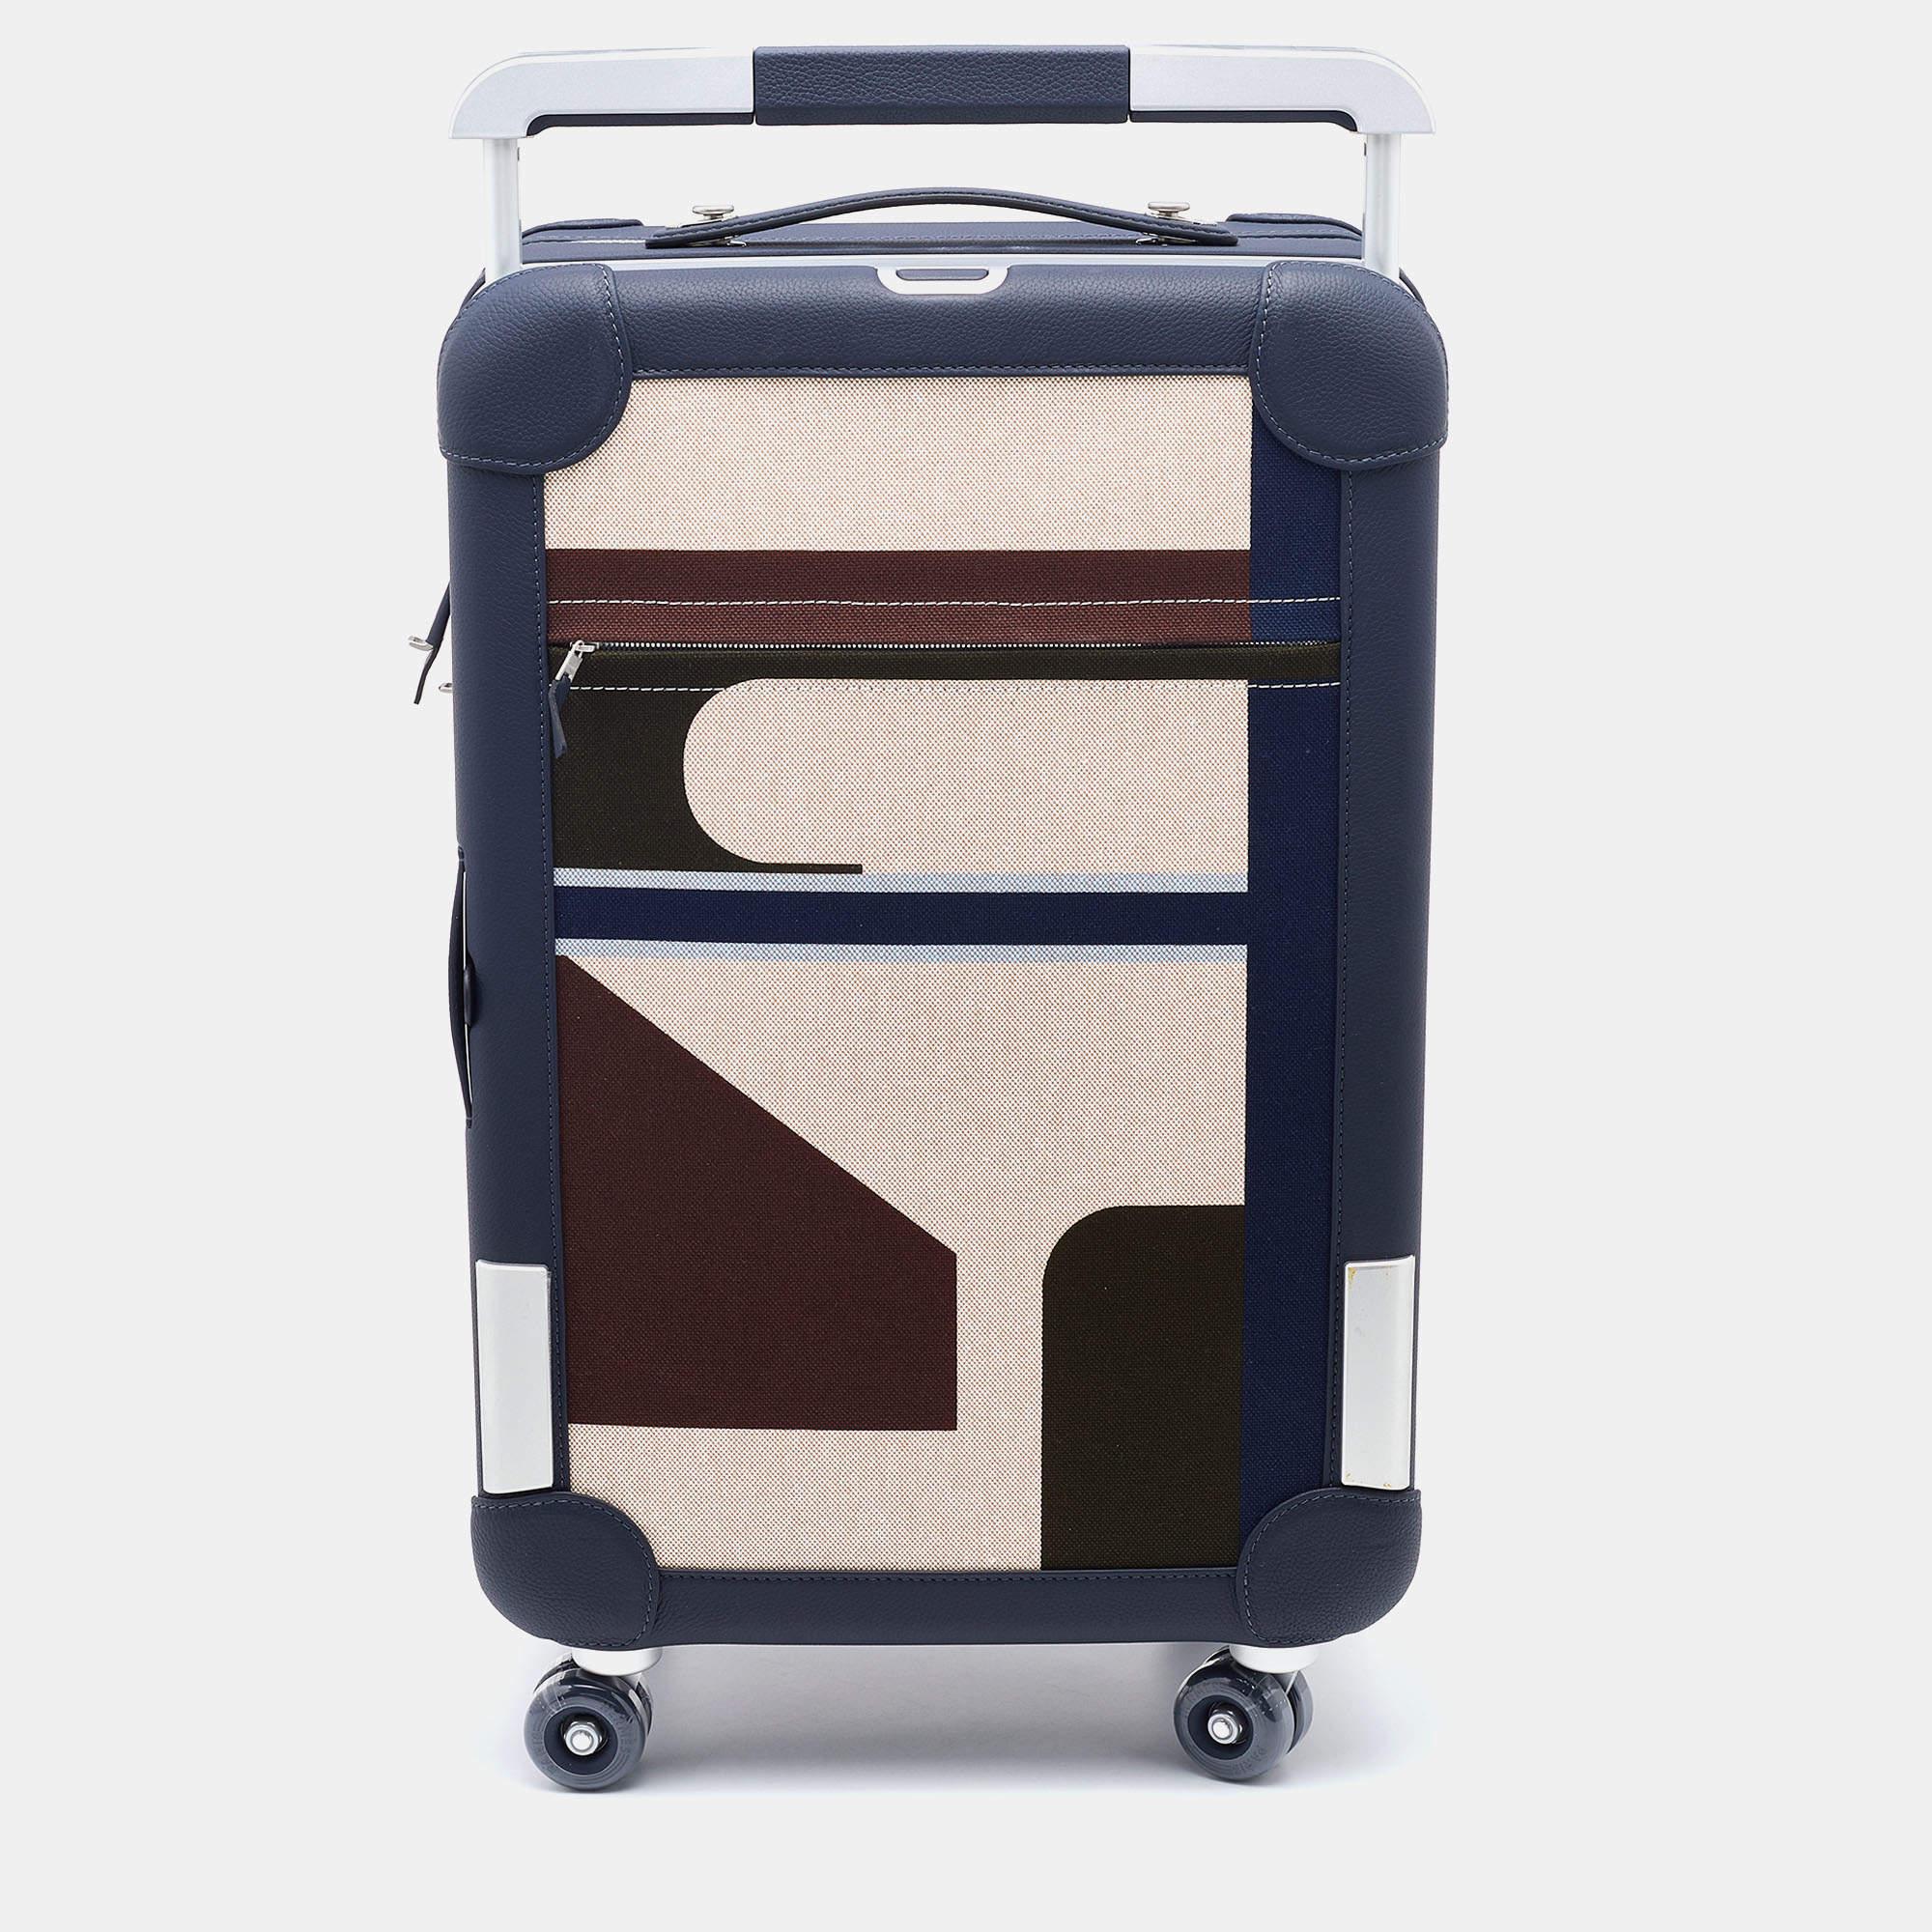 Travel to the places your heart desires with this Hermes suitcase. It is made of canvas and leather in a spacious size. Robust and ultra-mobile, it glides along smoothly on its four wheels, while its ingeniously arranged interior boasts many